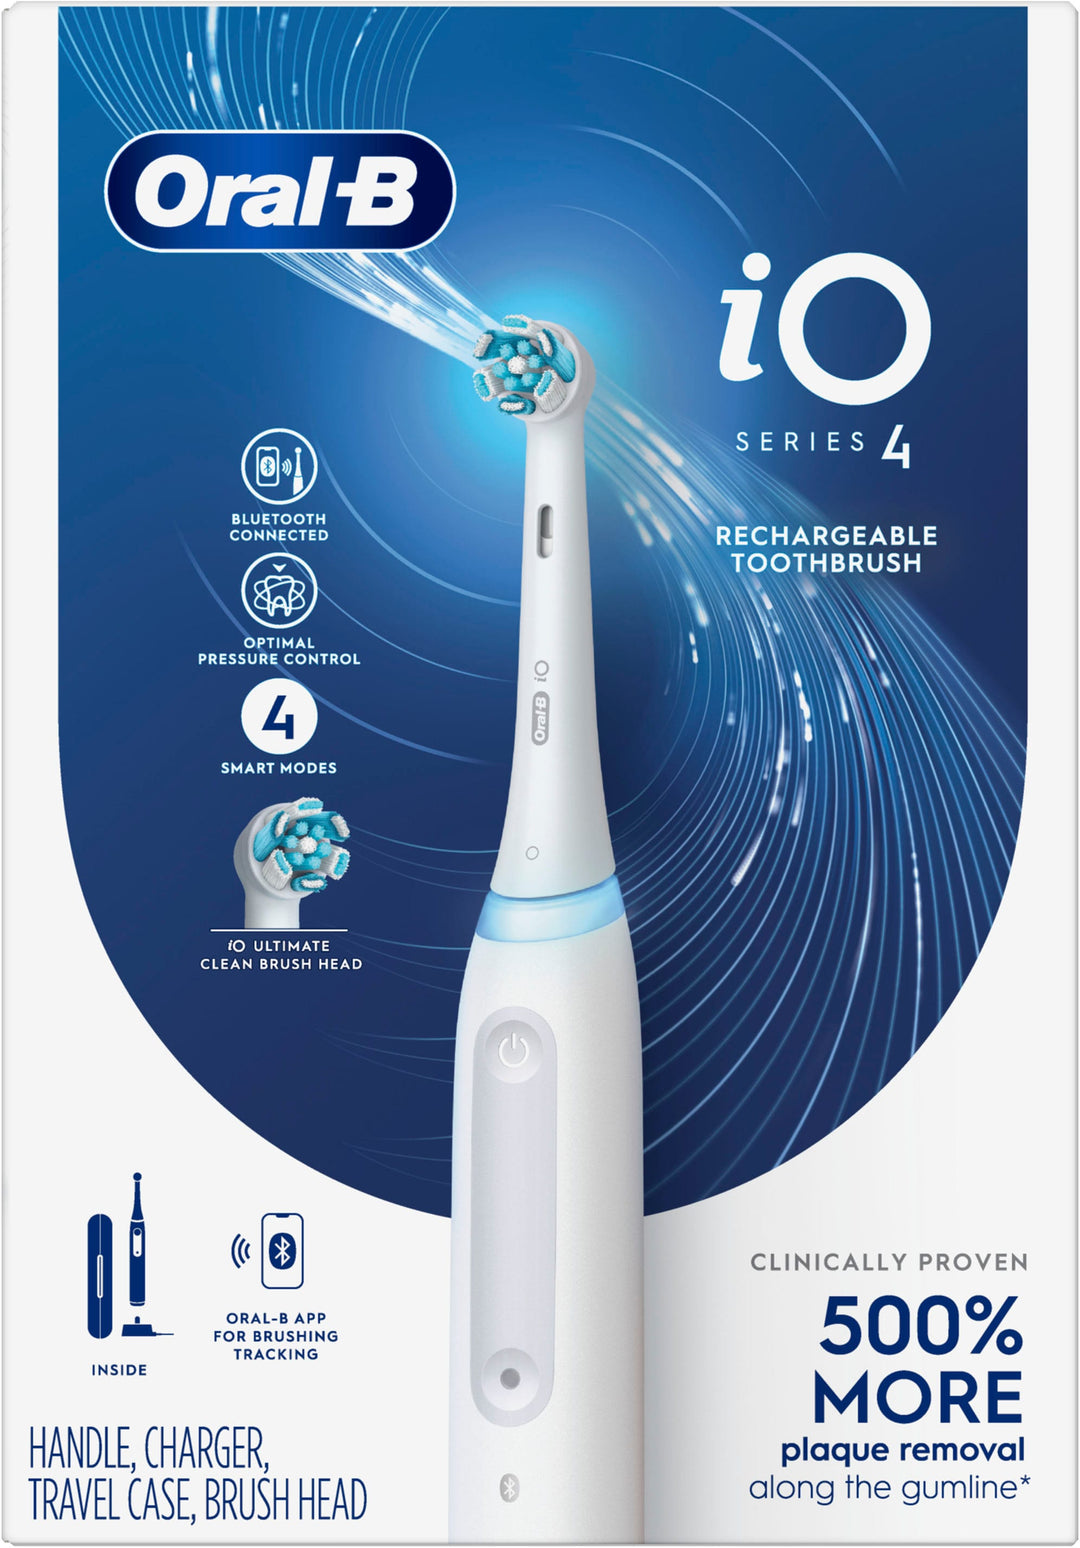 Oral-B - iO Series 4 Rechargeable Electric Toothbrush w/Brush Head - White_2